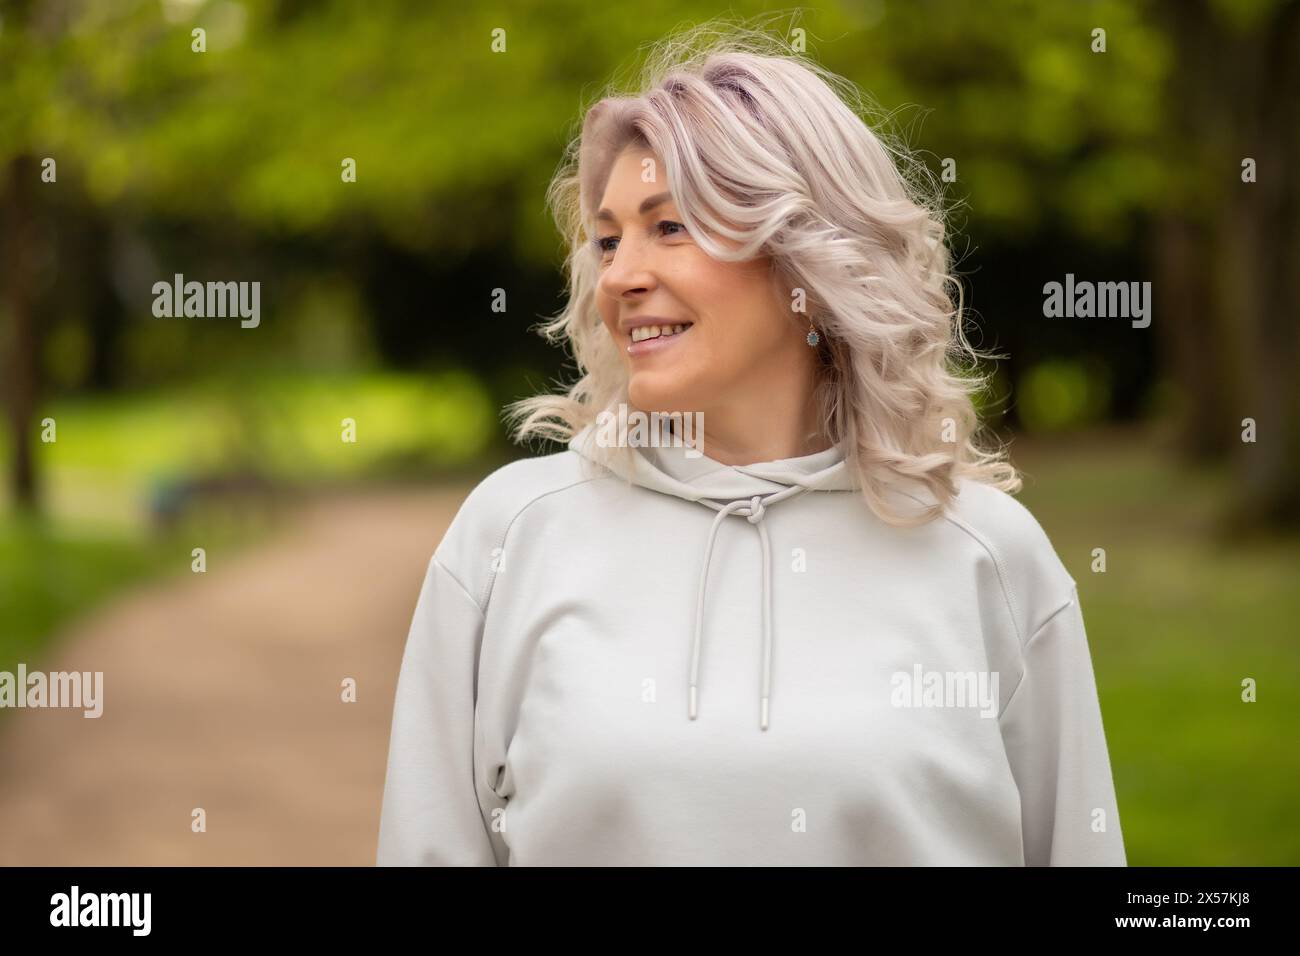 Woman with silver hair smiling in the park. Stock Photo